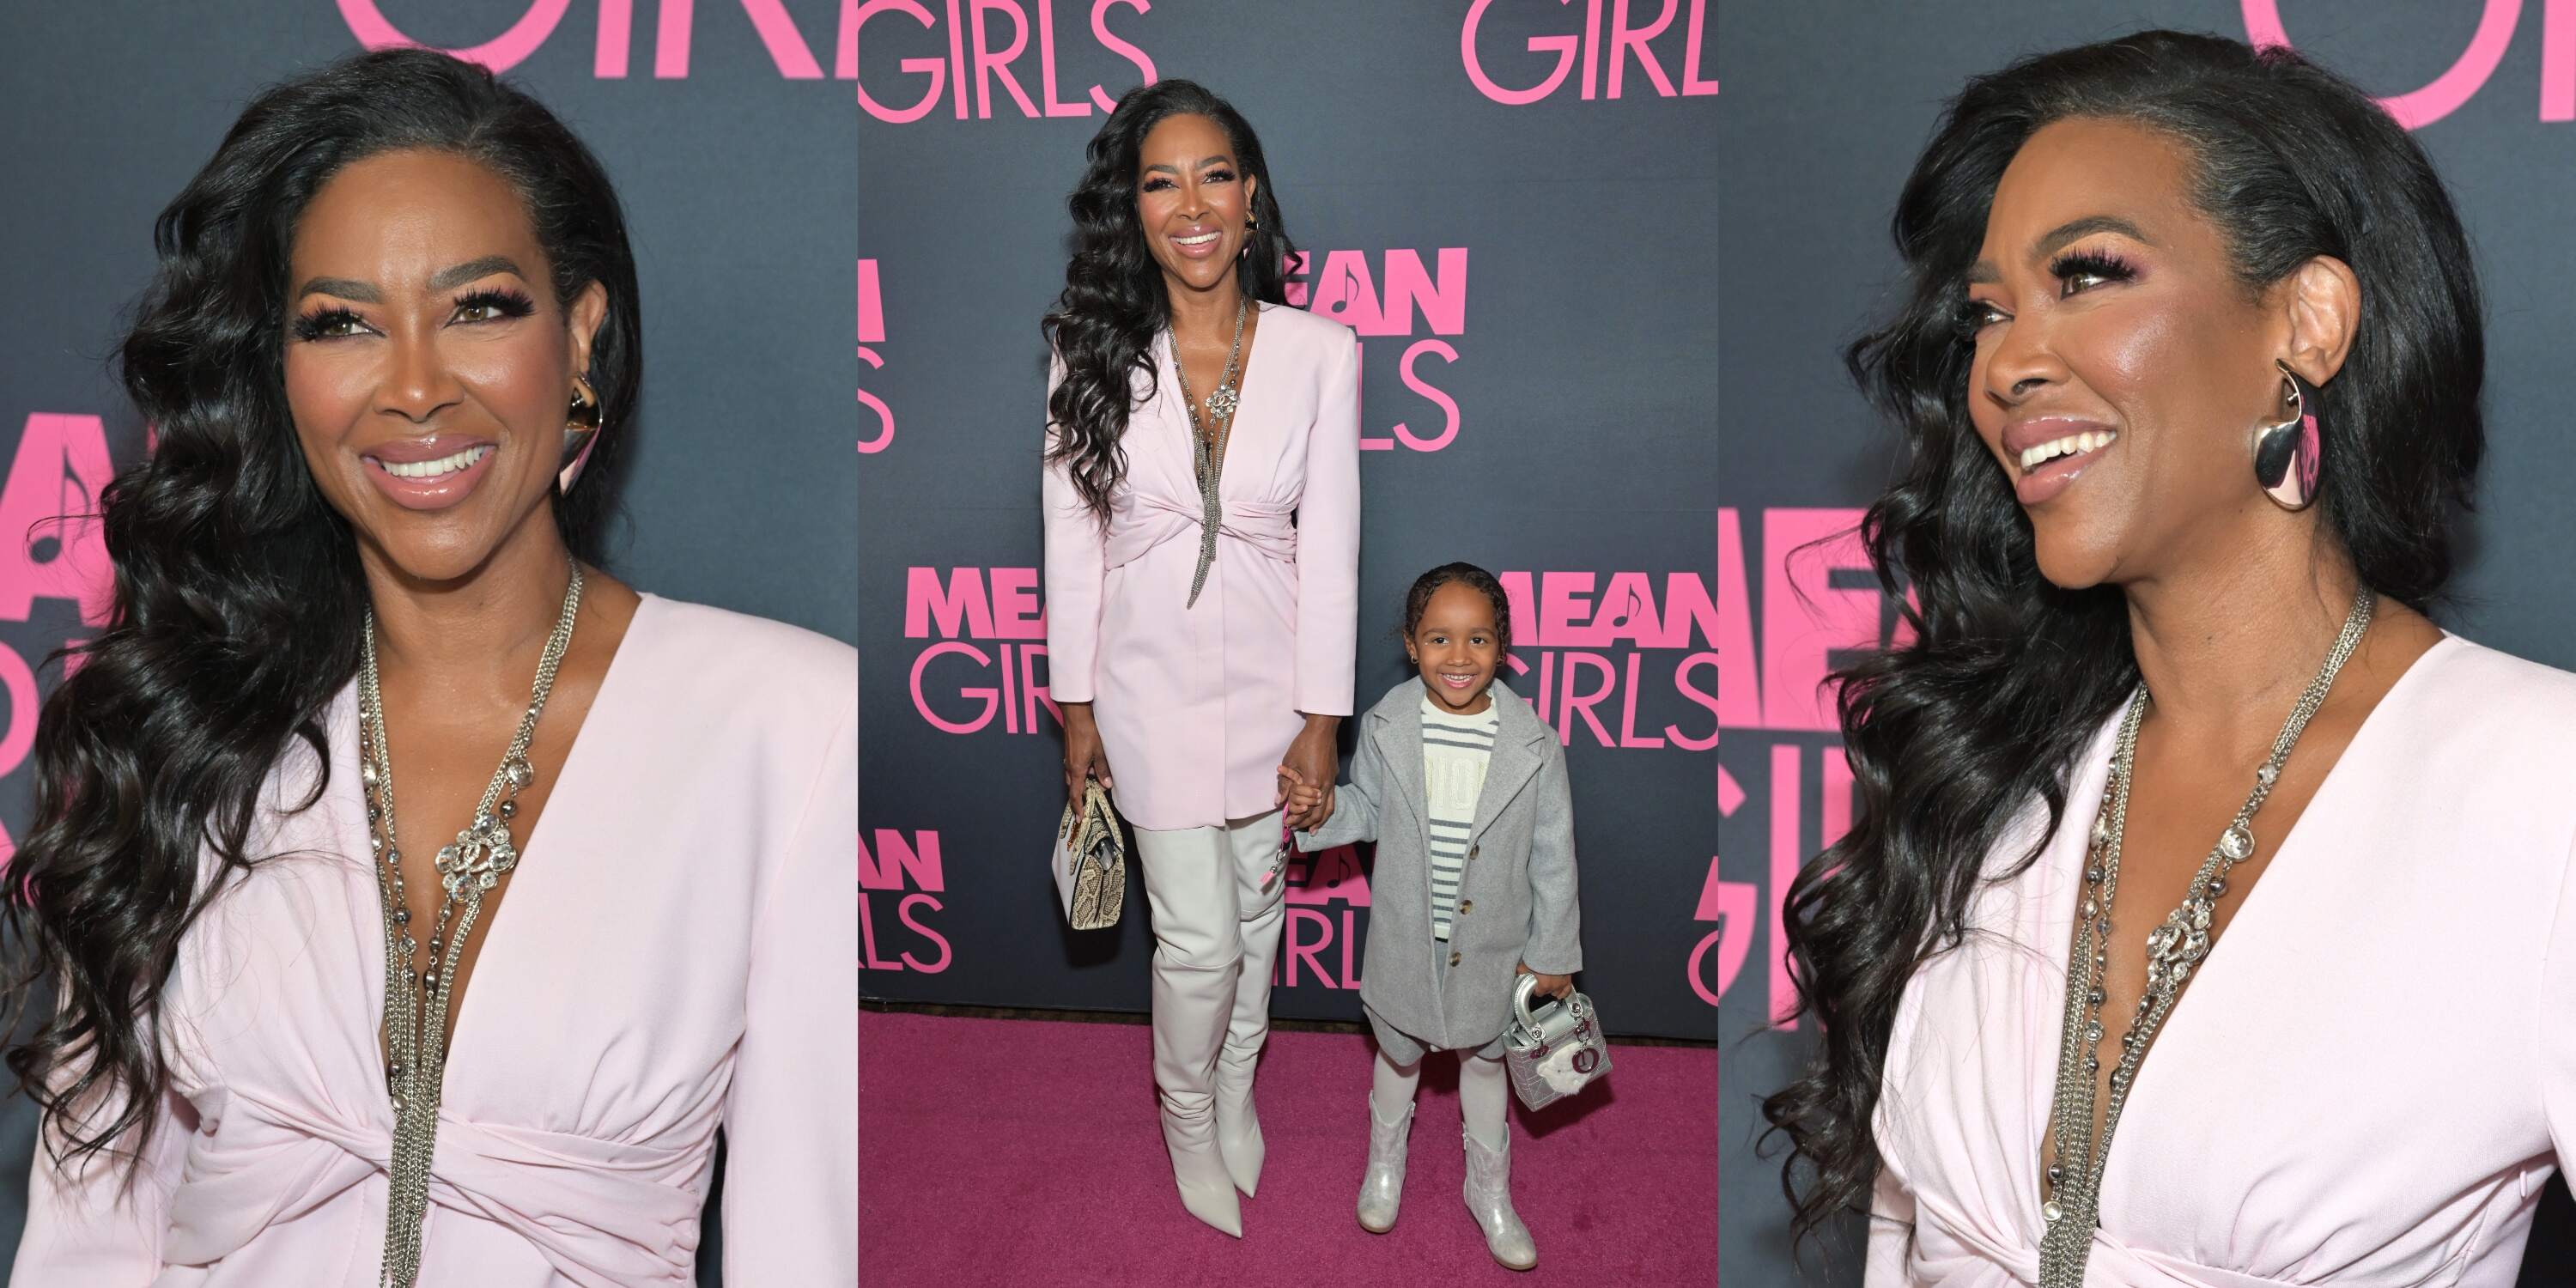 Wearing a pink blazer, Kenya Moore and daughter Brooklyn attend the Mean Girls screening